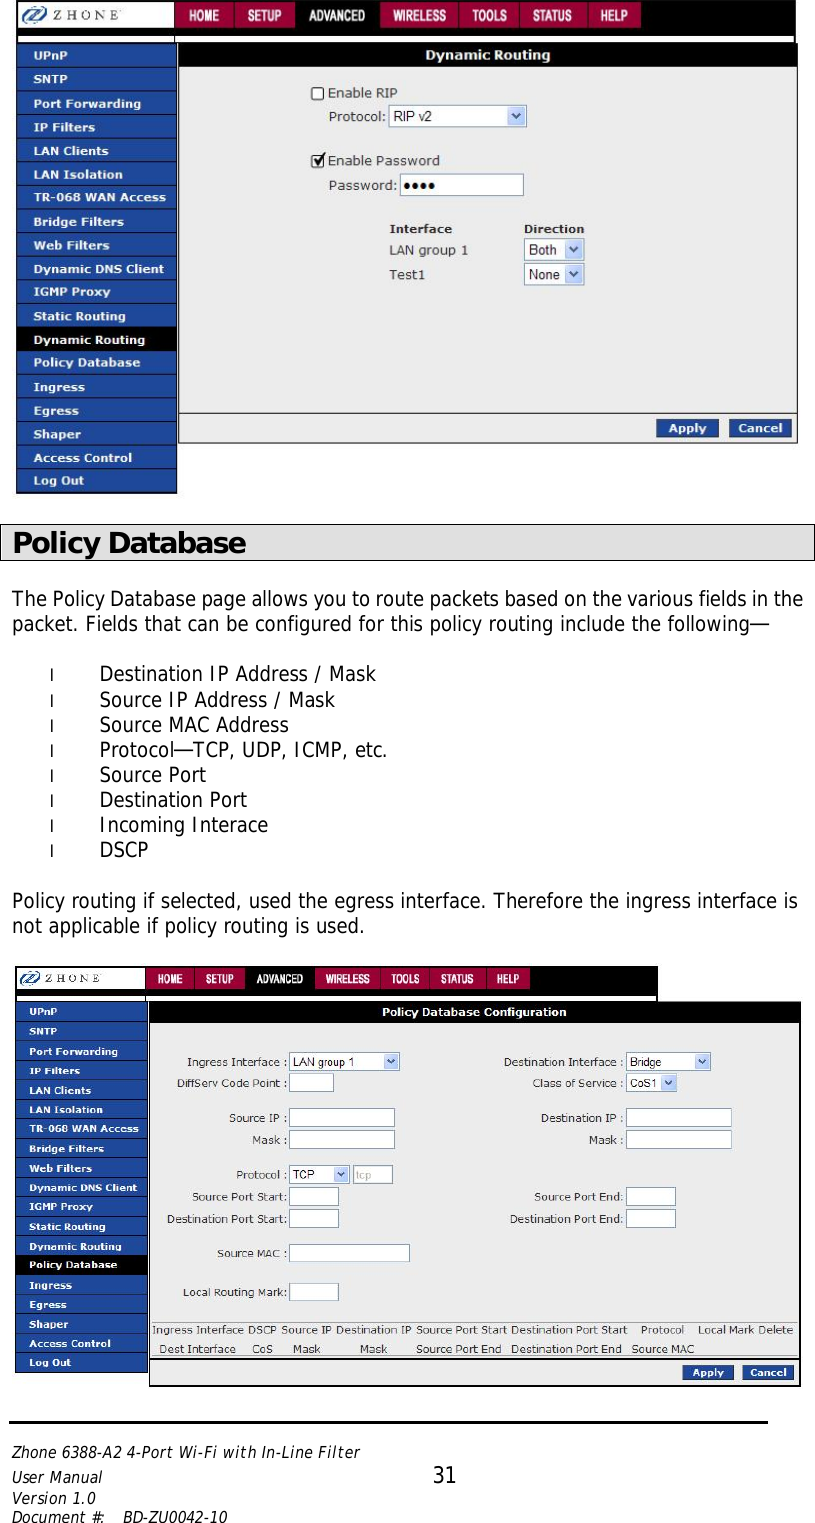   Zhone 6388-A2 4-Port Wi-Fi with In-Line Filter User Manual 31 Version 1.0 Document #:  BD-ZU0042-10     Policy Database  The Policy Database page allows you to route packets based on the various fields in the packet. Fields that can be configured for this policy routing include the following—  l Destination IP Address / Mask l Source IP Address / Mask l Source MAC Address l Protocol—TCP, UDP, ICMP, etc. l Source Port l Destination Port l Incoming Interace l DSCP  Policy routing if selected, used the egress interface. Therefore the ingress interface is not applicable if policy routing is used.   